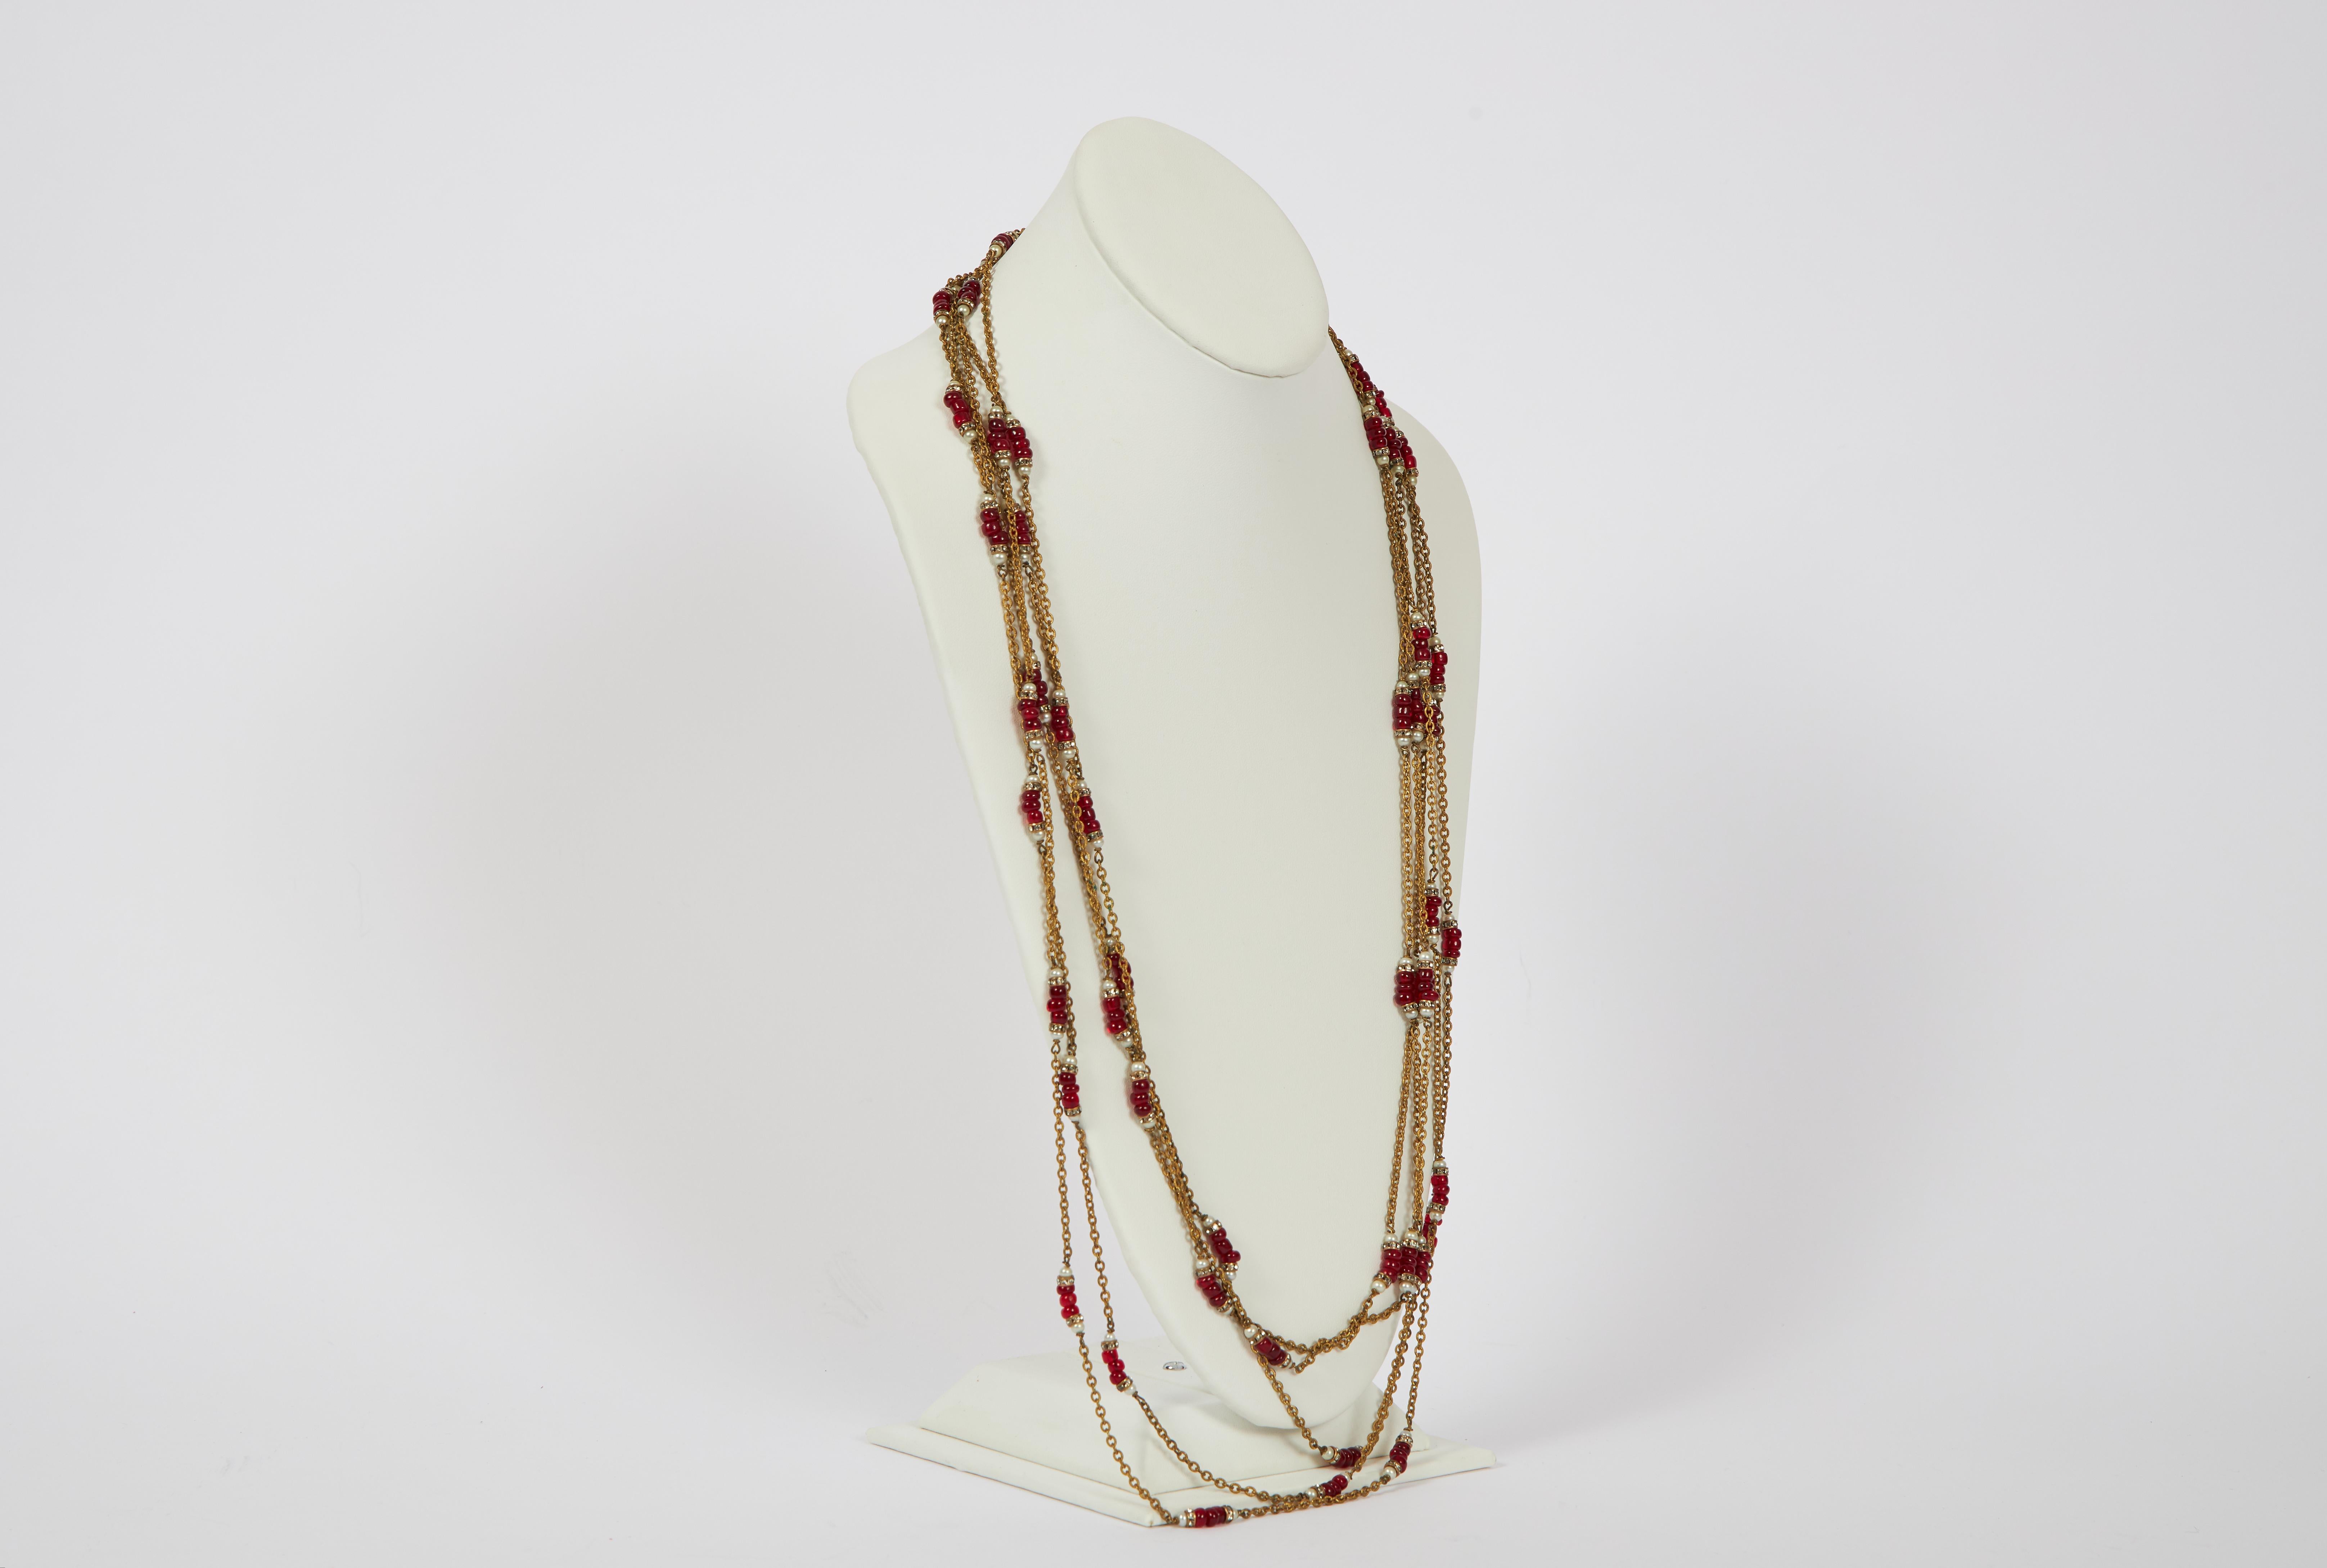 1960s Chanel five-strand graduated chain necklace embellished with red gripoix and faux-pearl beads. Can be worn single or double. Original box included. Minor wear.